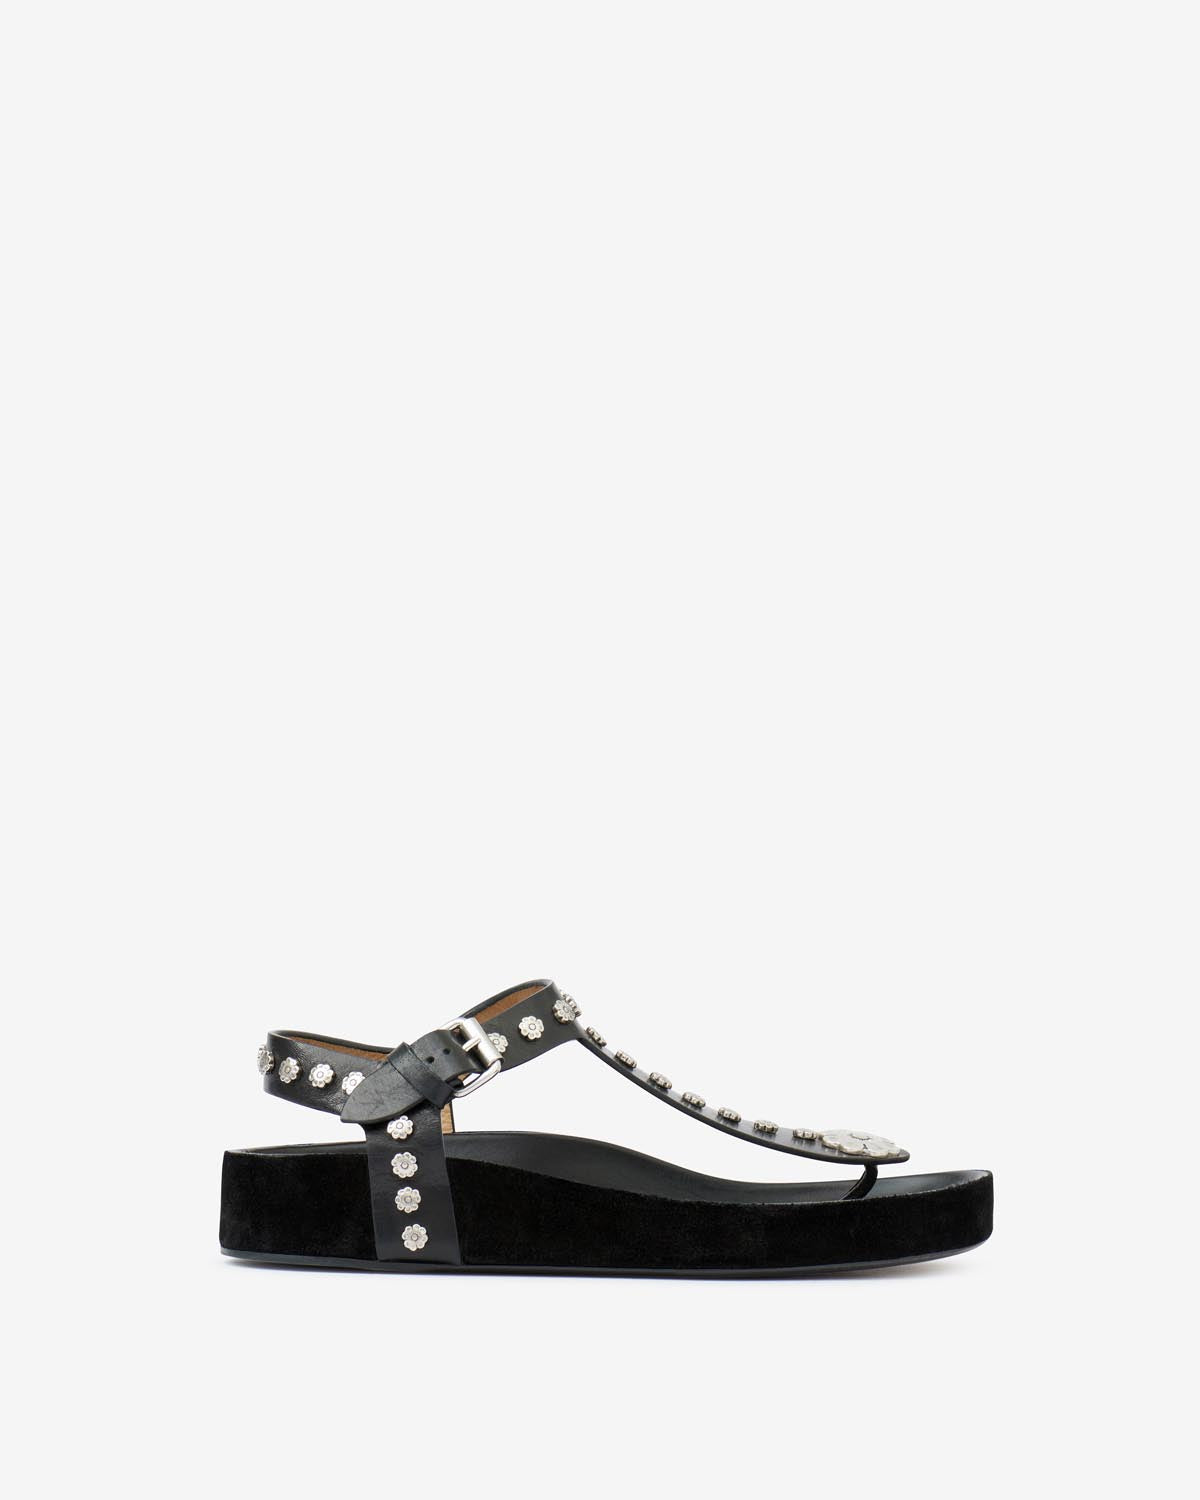 Enore sandals Woman Black and silver 1